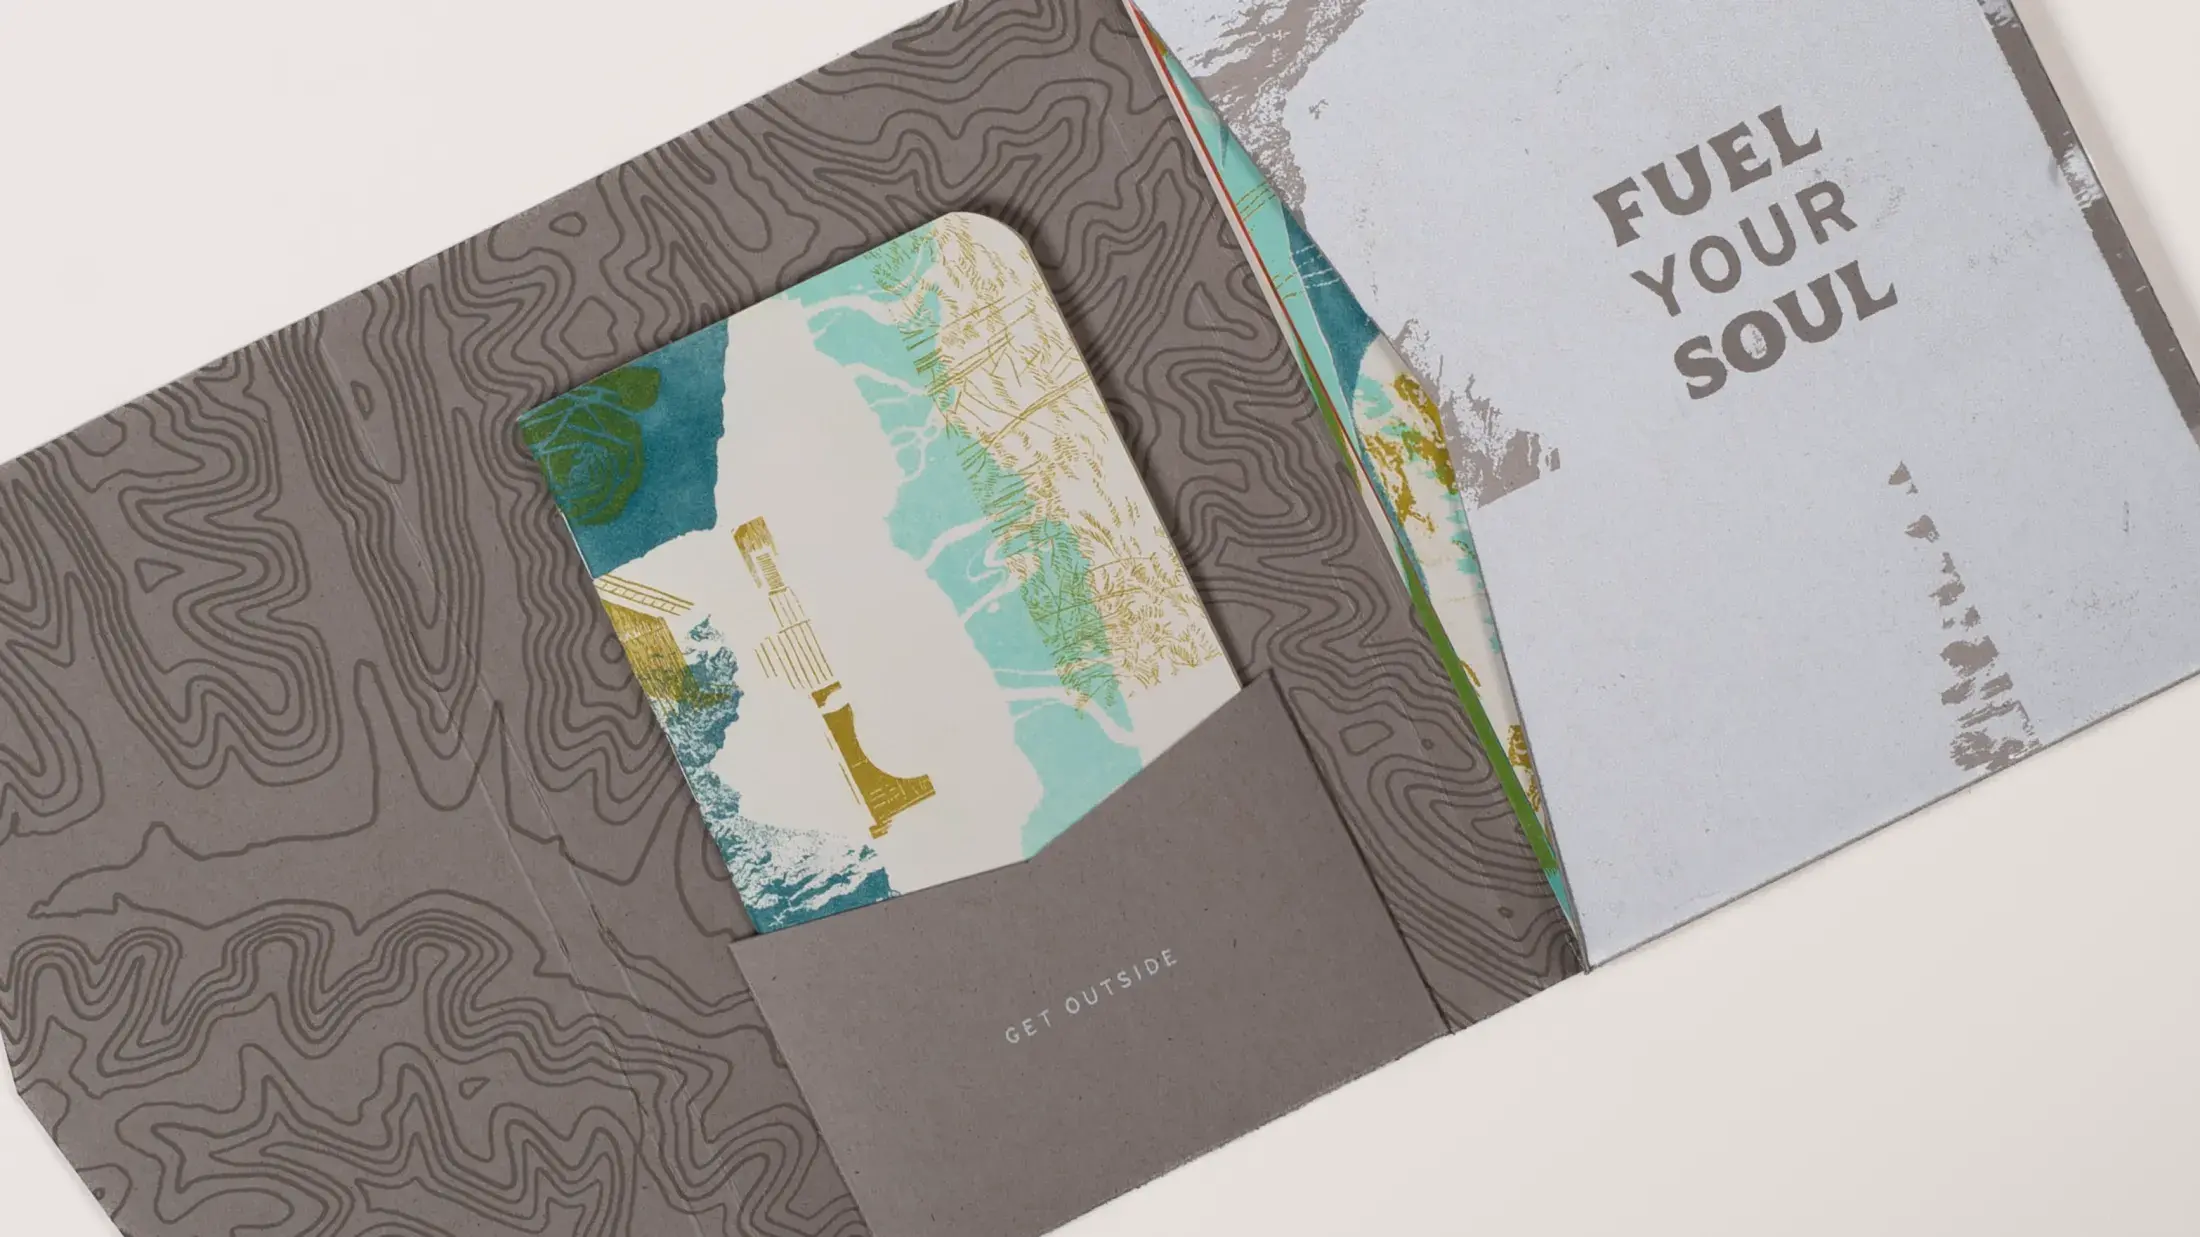 open packaging showing textured interior, booklet and postcards in pouch